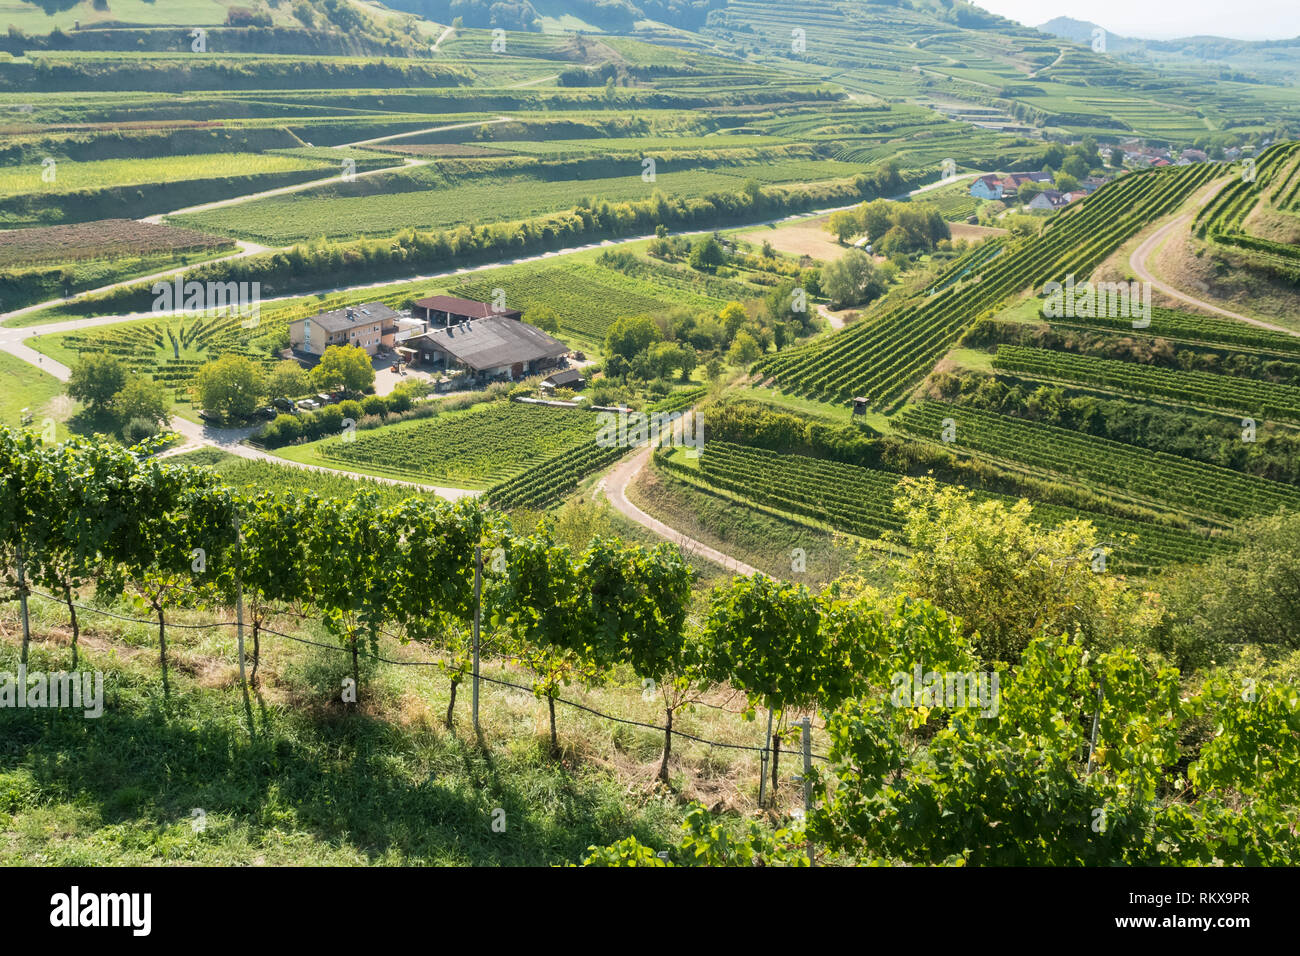 Schatzle winery surrounded by vineyards growing on volcanic terraces in the Kaiserstuhl wine district in the Baden wine region of southwestern Germany Stock Photo